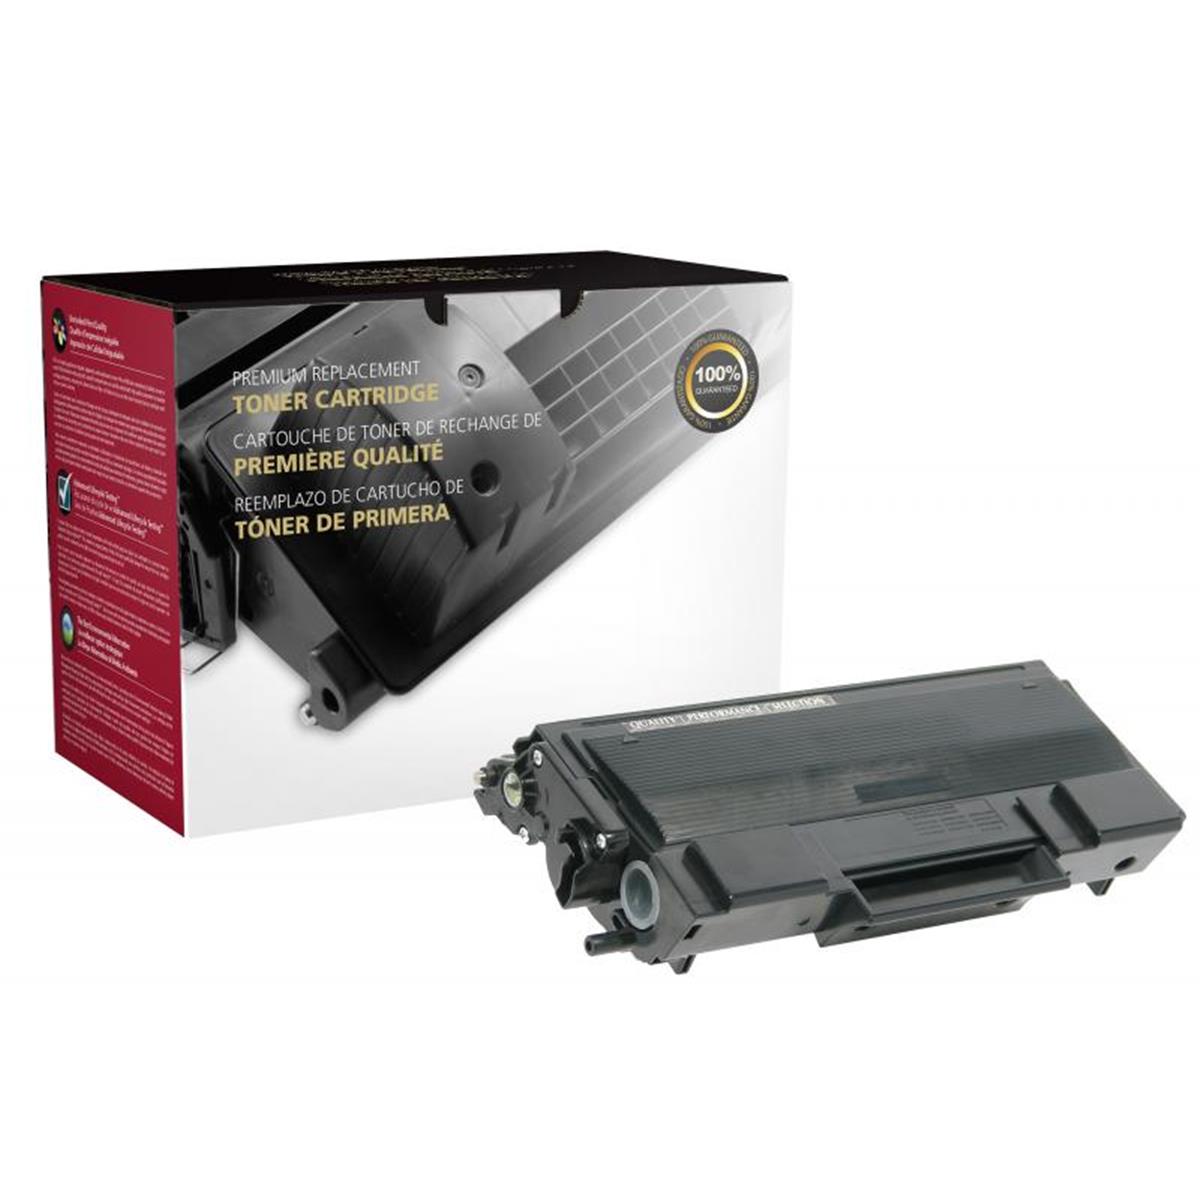 Picture of Brother 200028 Black High Yield Toner Cartridge for TN650